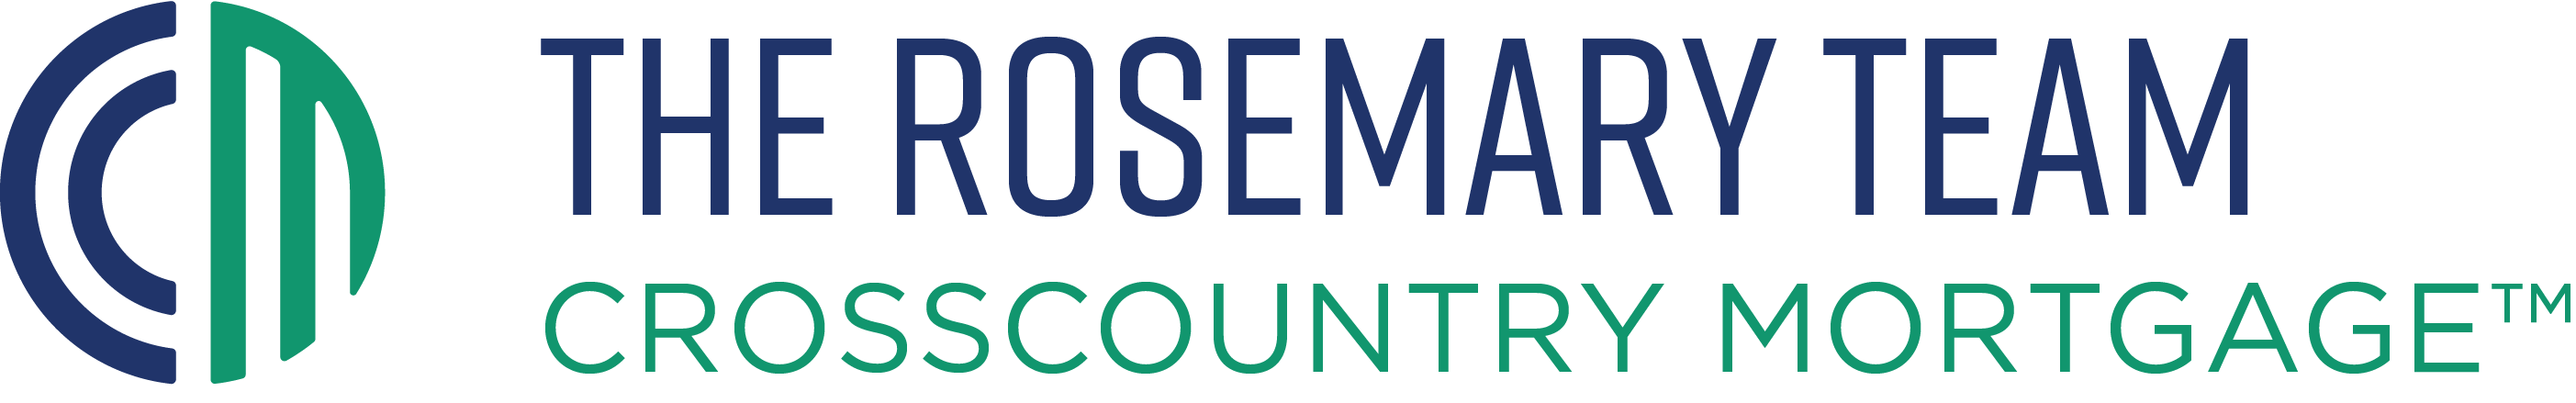 Logo of The Rosemary Team at CrossCountry Mortgage